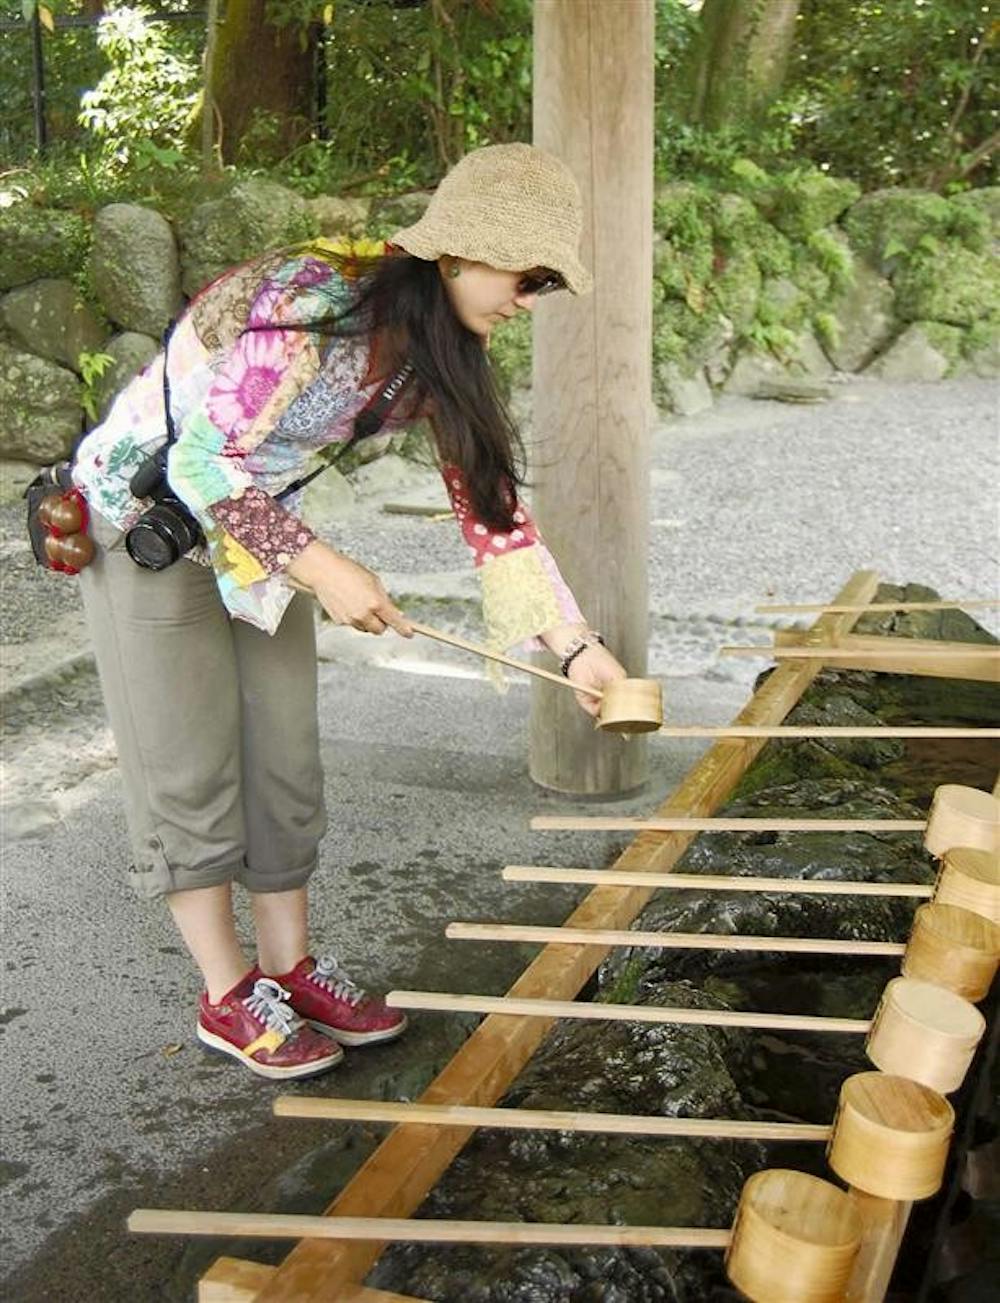 A visitor to a Shinto shrine in Osaka, Japan, washes her hands in a stone wash basin at the shrine’s entrance in preparation for prayer.